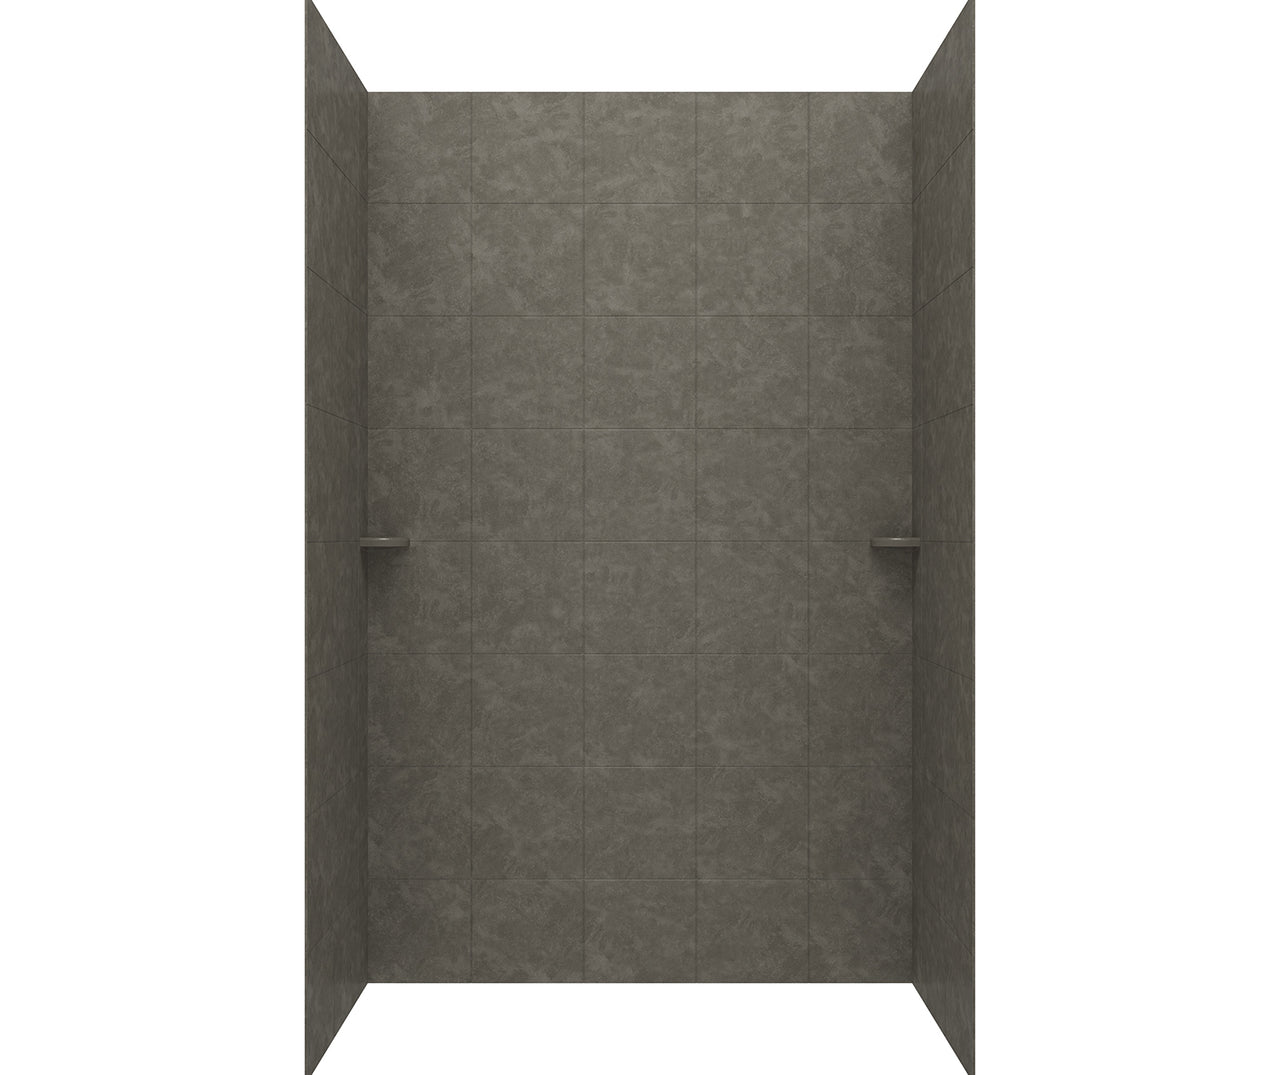 SQMK96-3662 36 x 62 x 96 Swanstone Square Tile Glue up Shower Wall Kit in Charcoal Gray